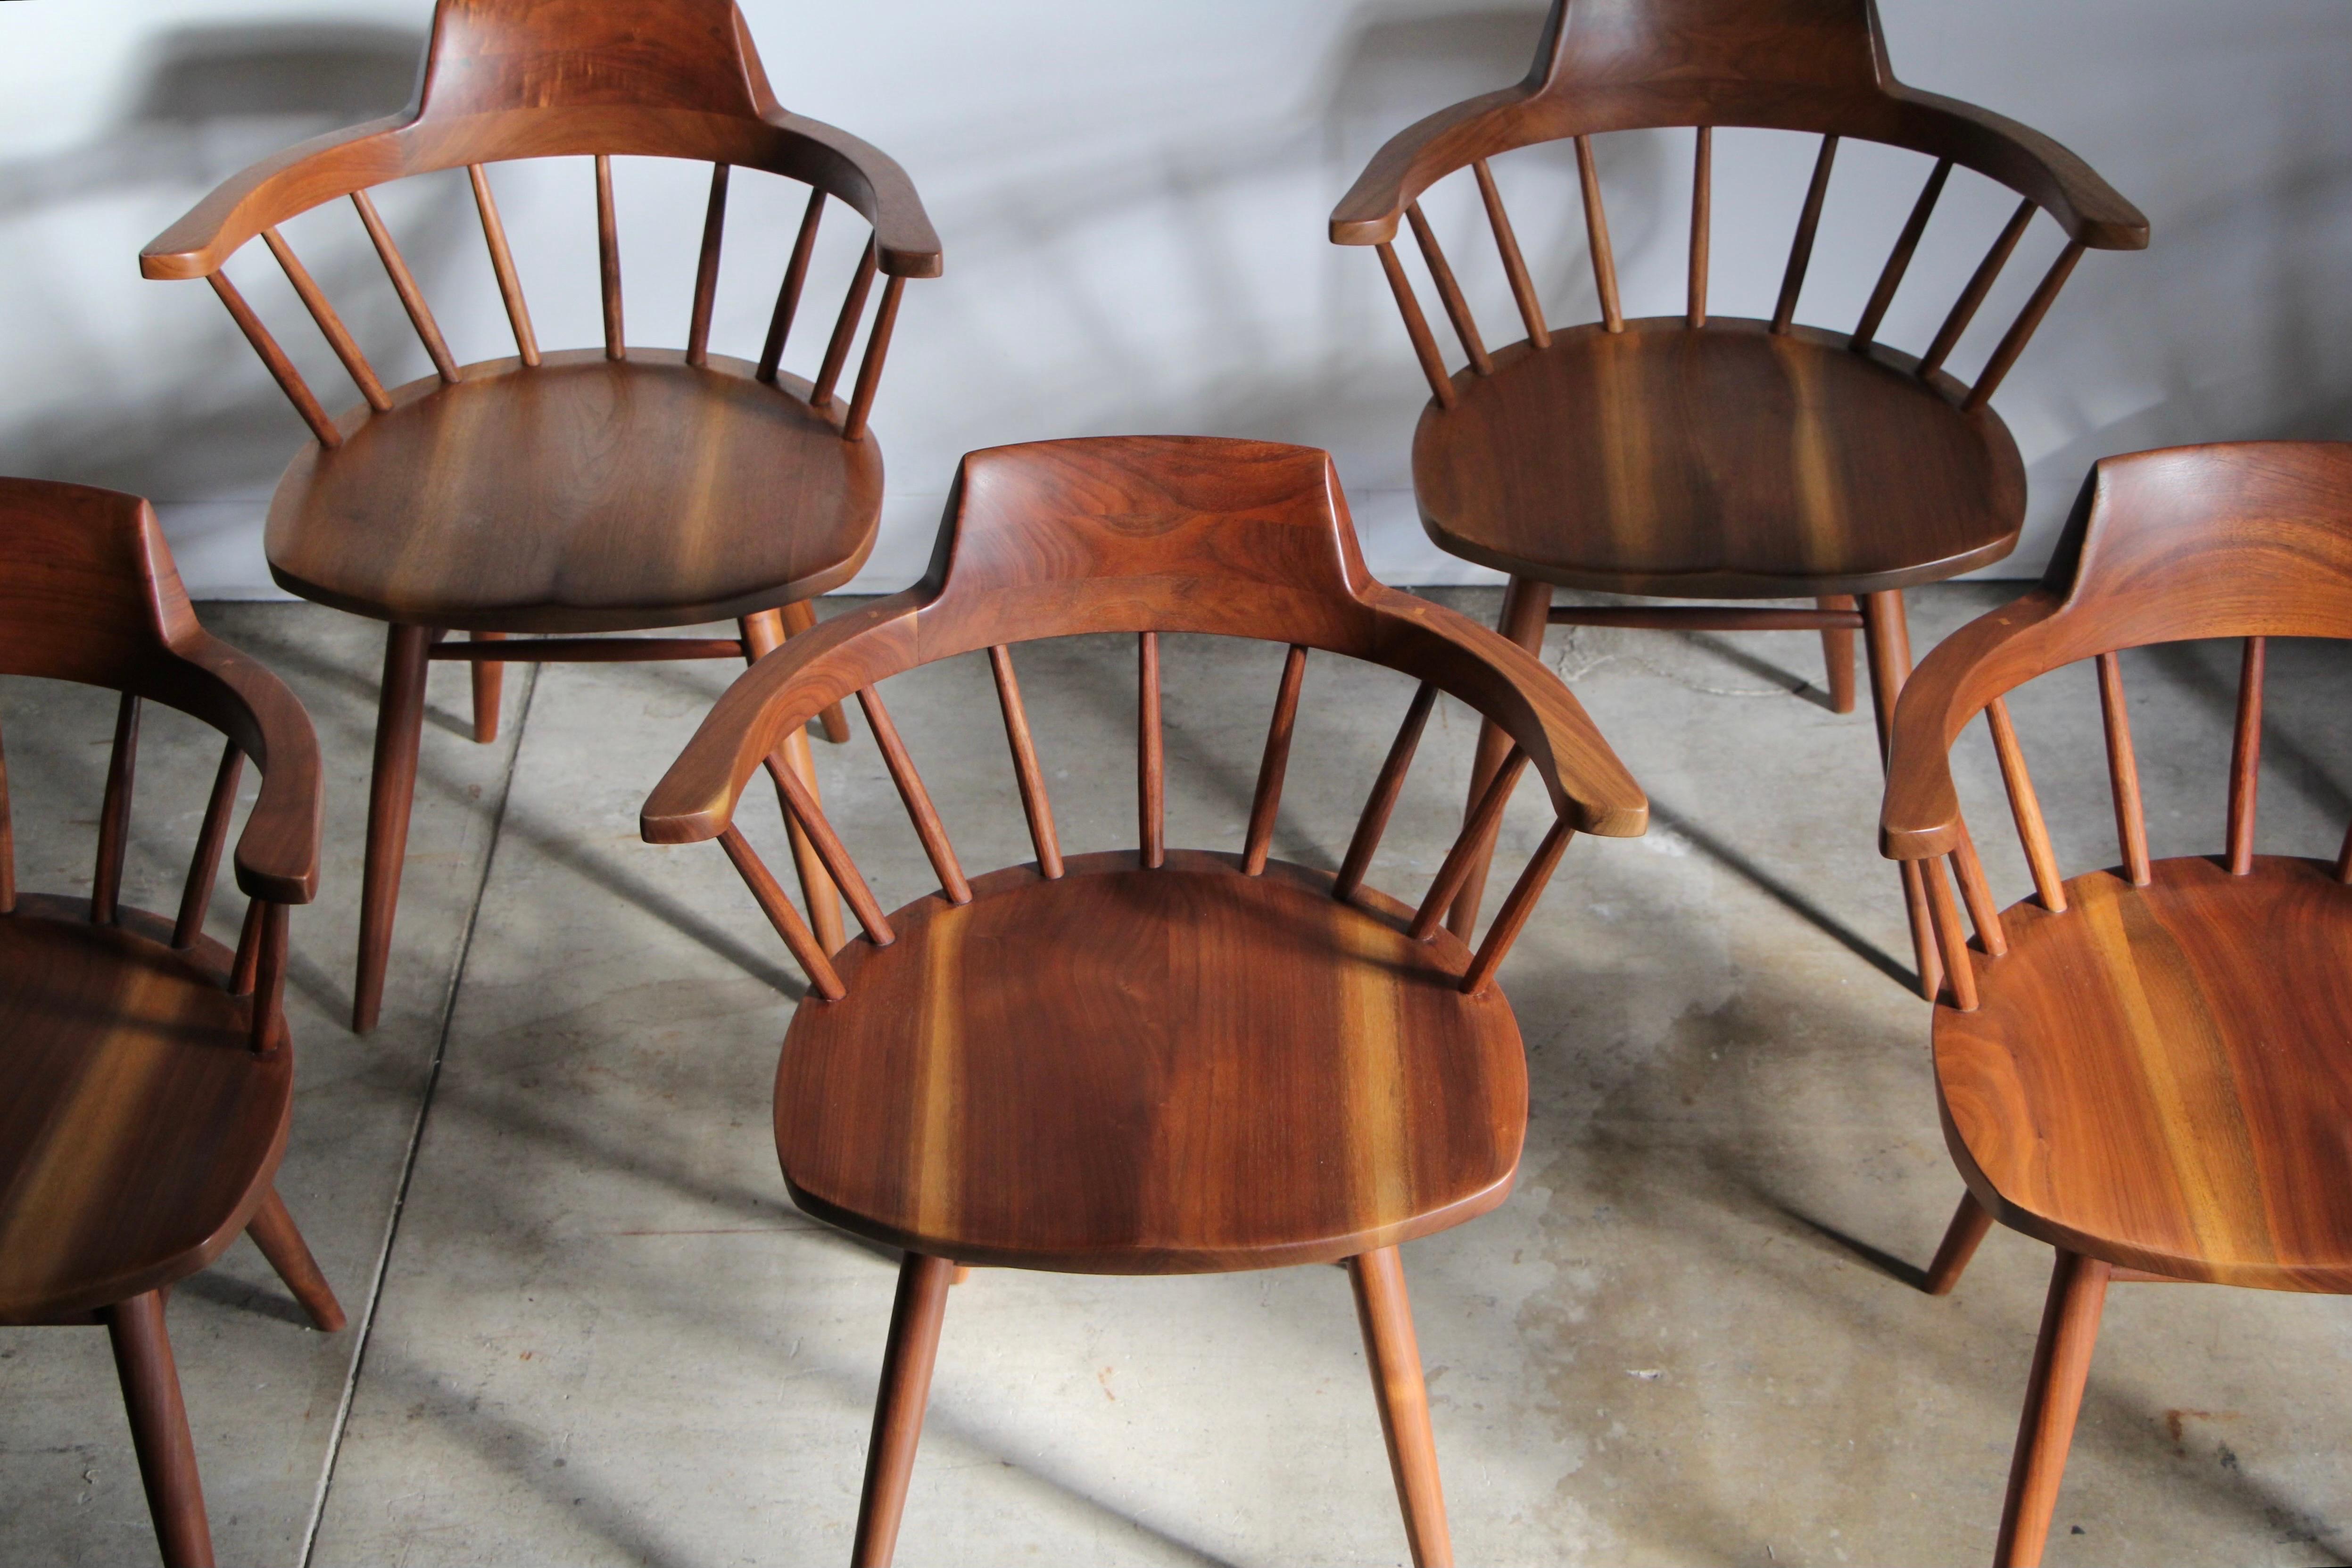 It doesn't get much better than this--an early set of original and authentic George Nakashima 